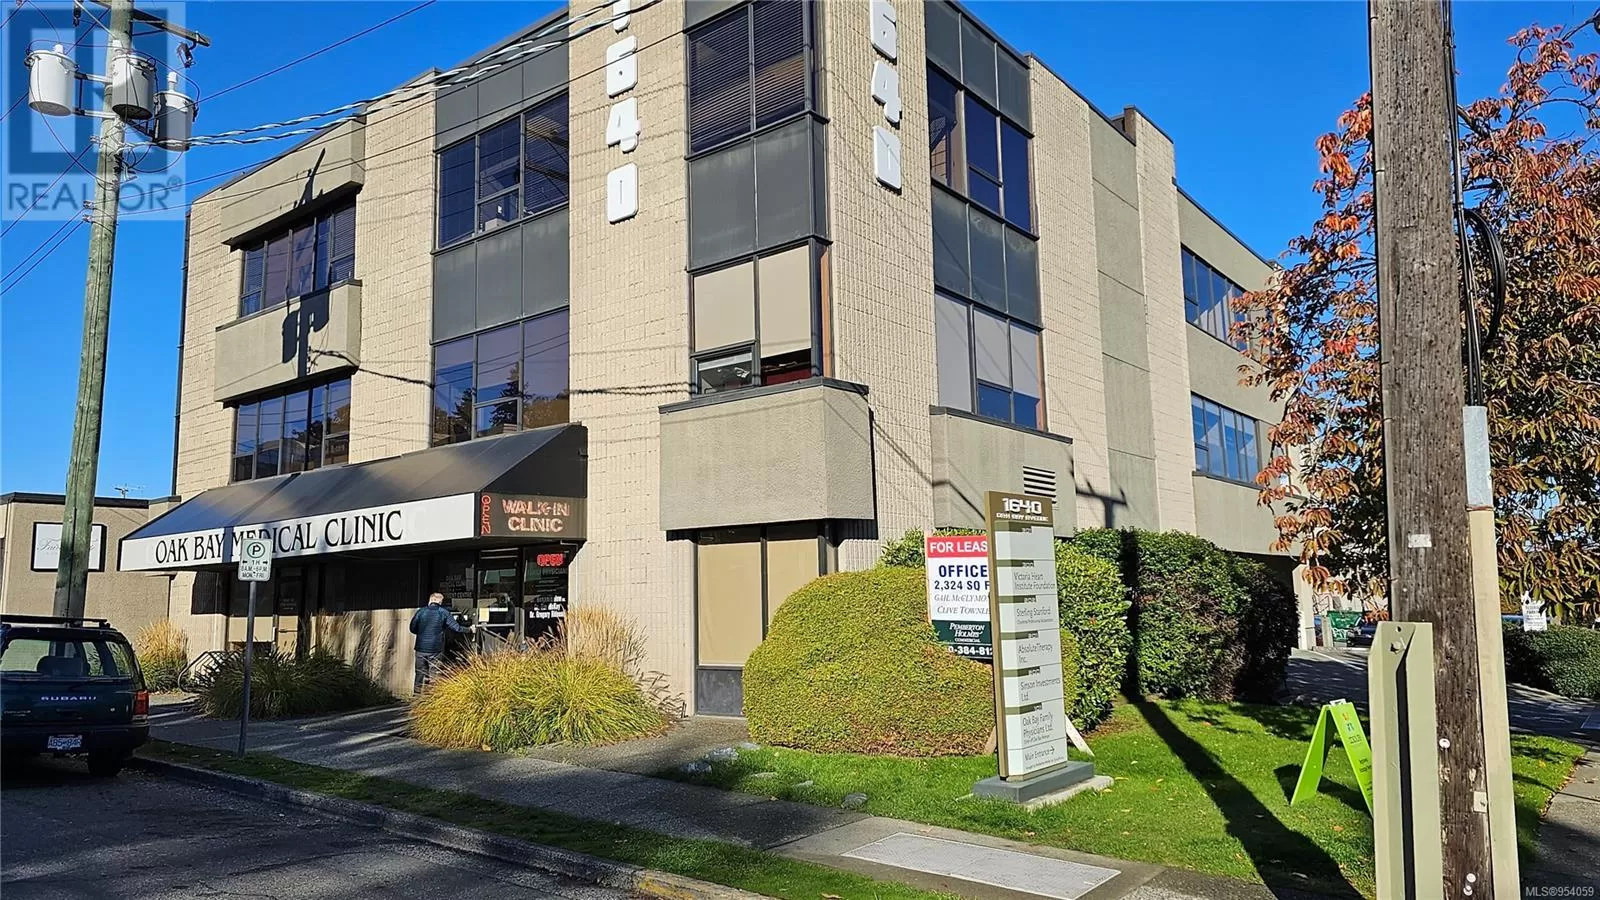 Offices for rent: 302 1640 Oak Bay Ave, Victoria, British Columbia V8R 1B2